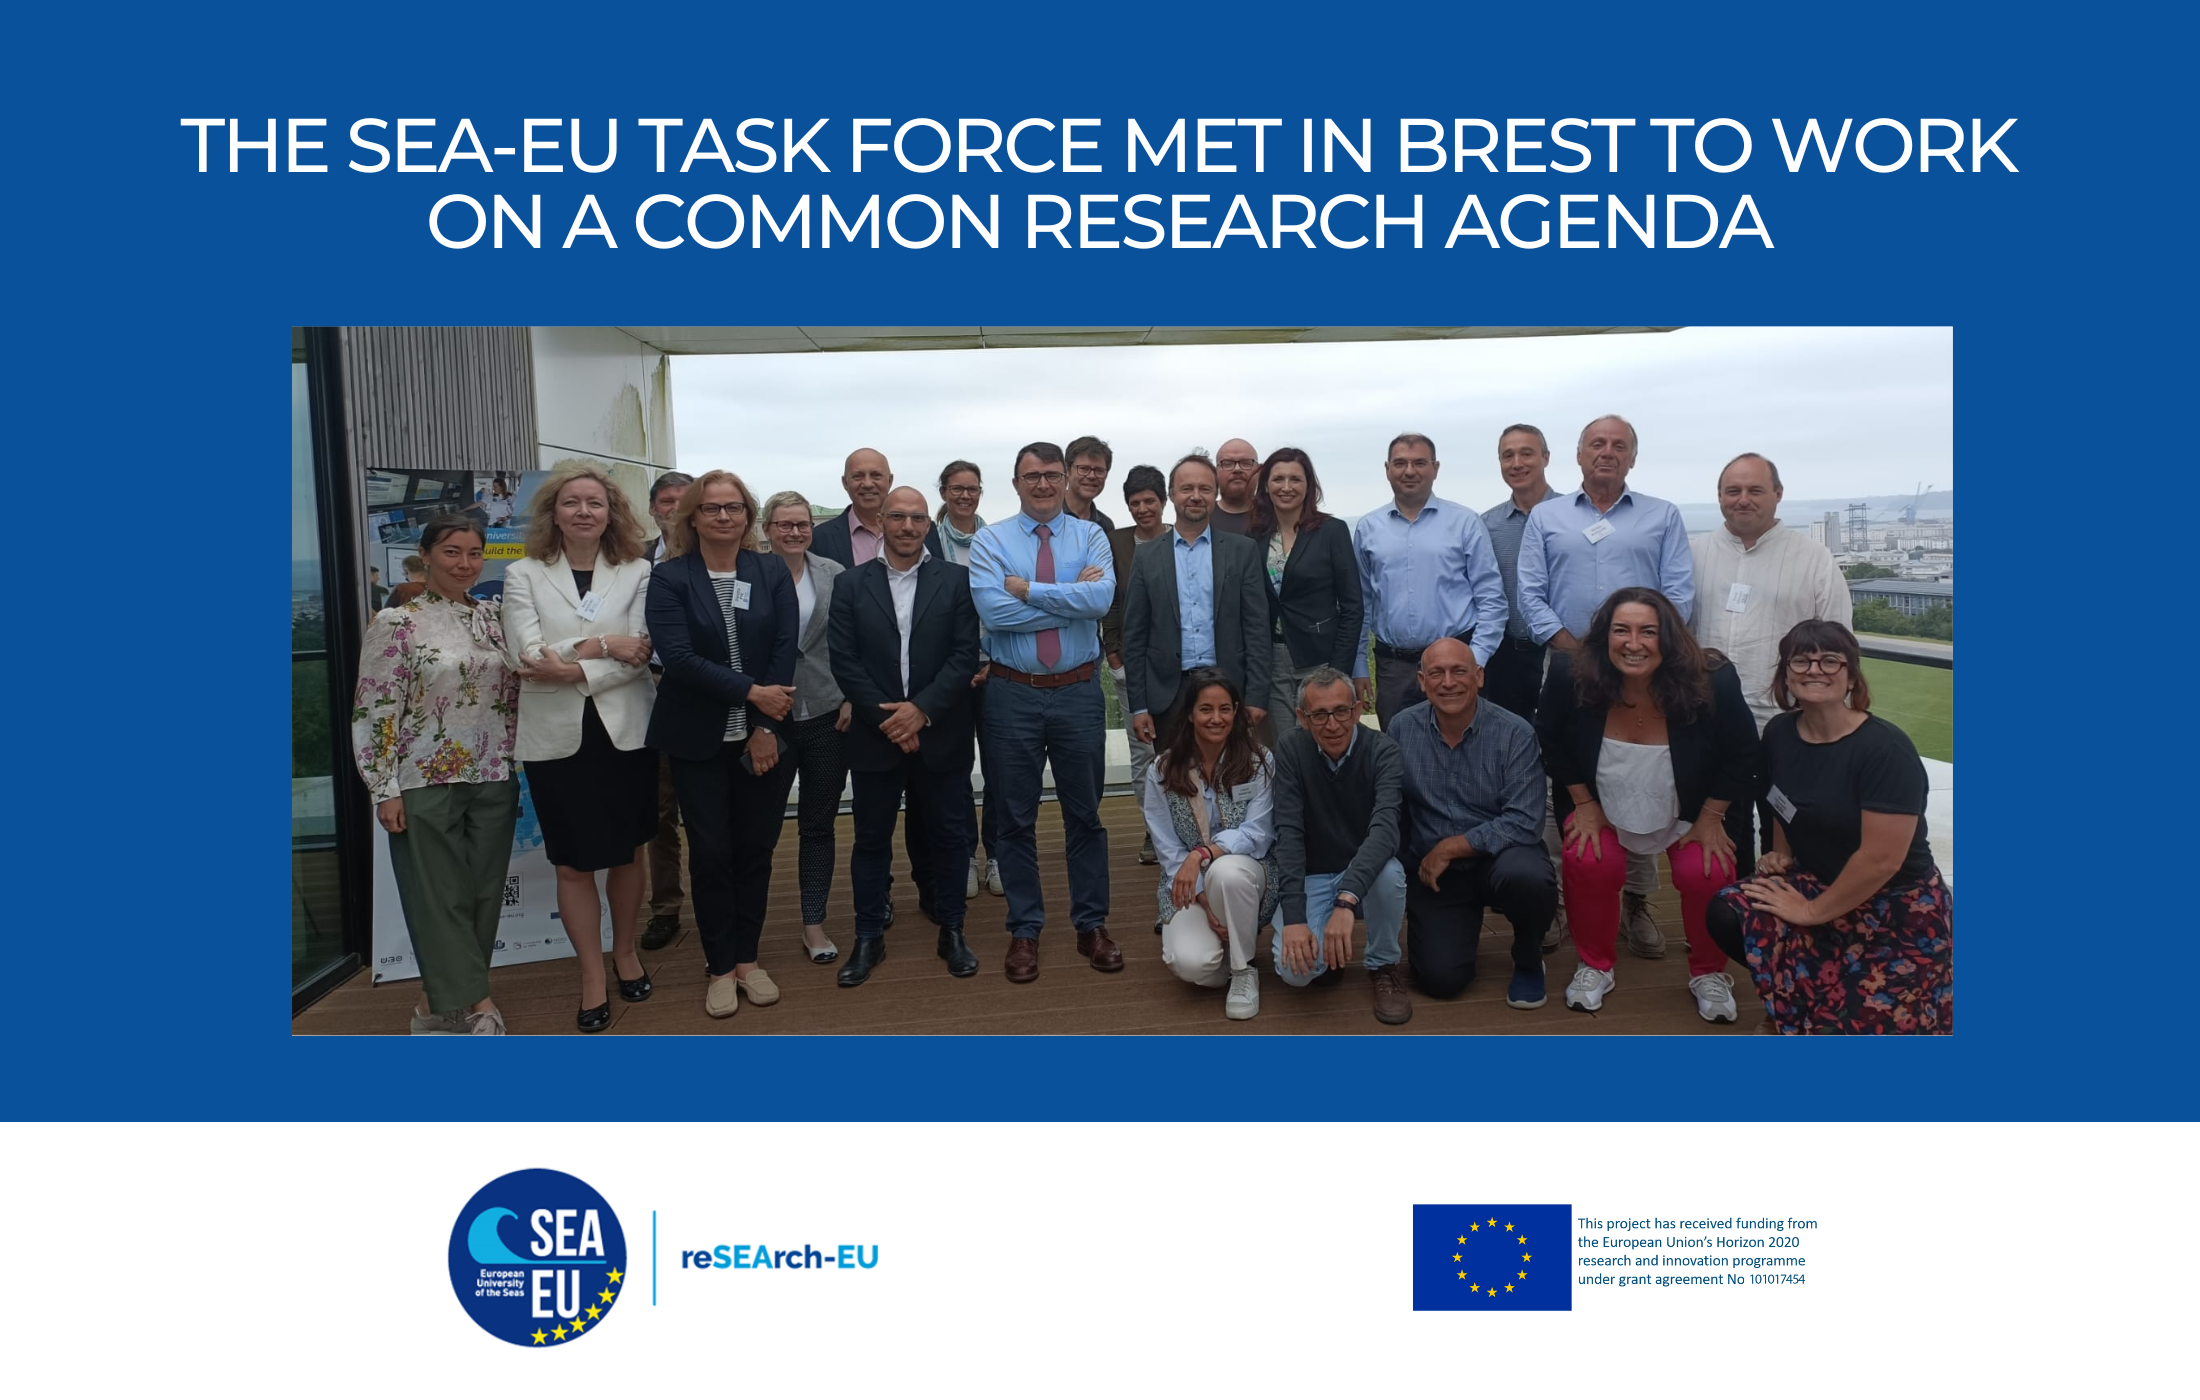 THE SEA-EU TASK FORCE MET IN BREST TO WORK ON A COMMON RESEARCH AGENDA